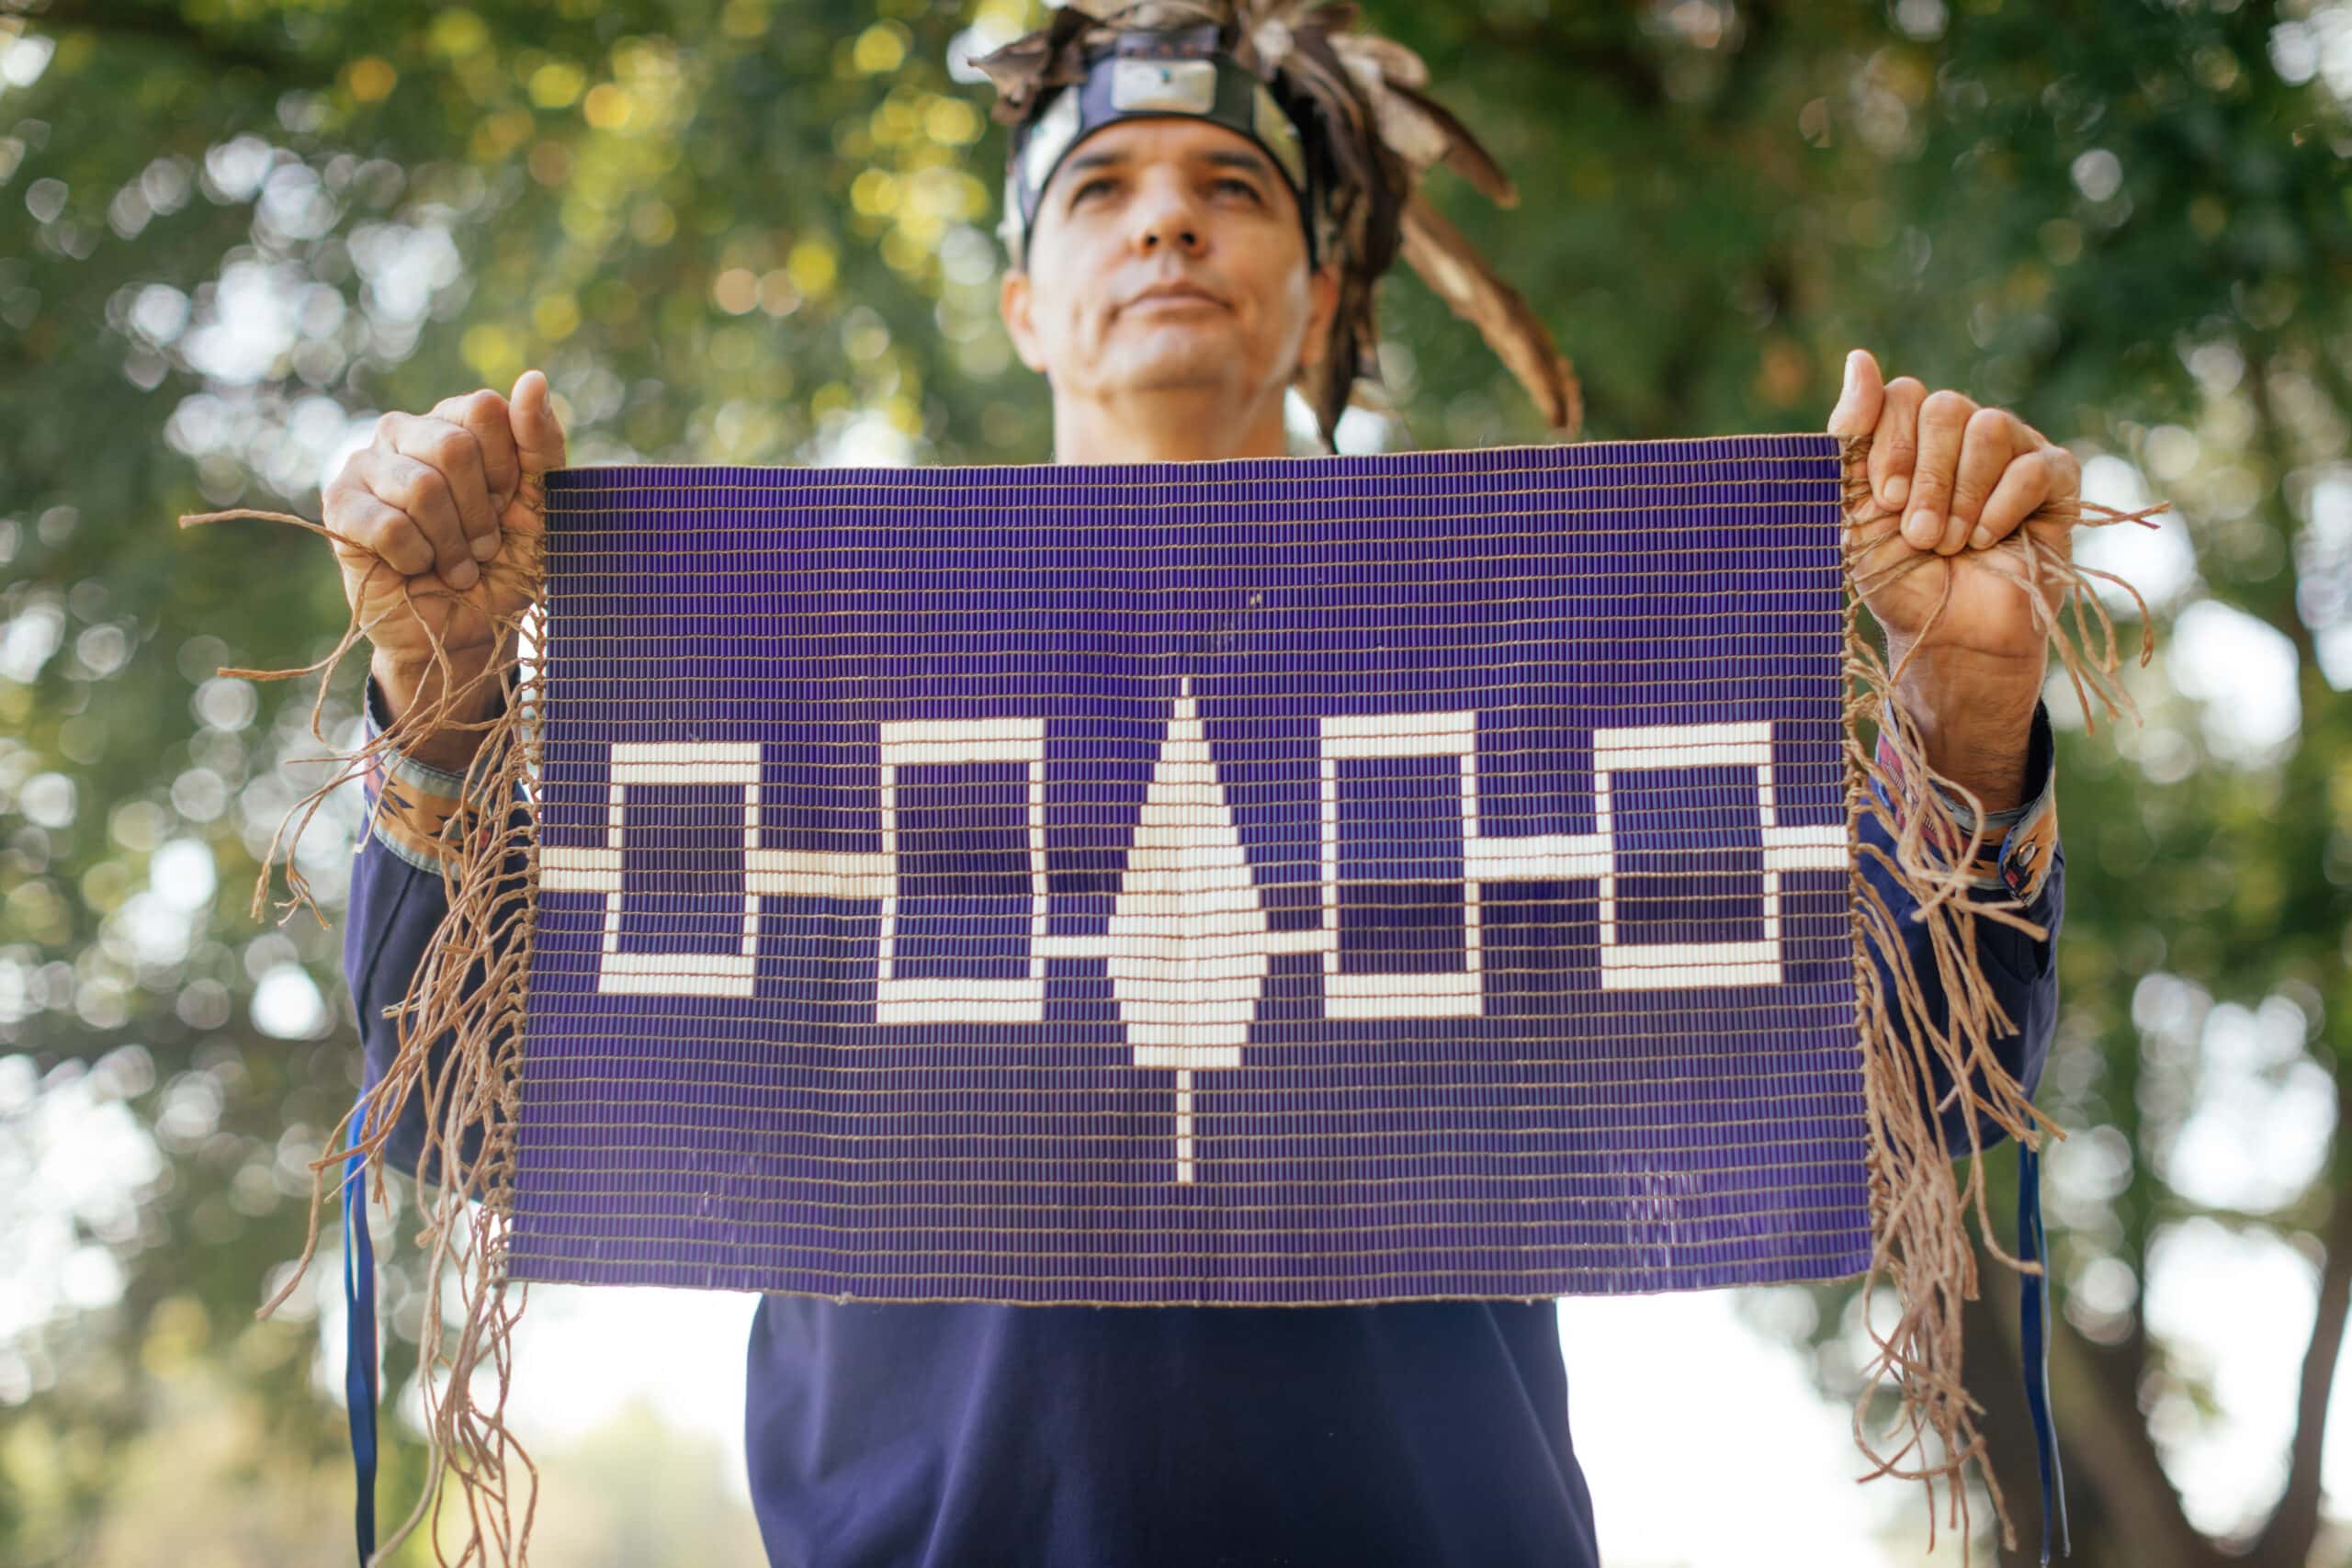 A Cayuga man wearing a headdress holds up a purple beaded belt. On the belt are four white rectangles connected together with a white tree in the centre, which is also connected to the rectangles. There are trees in the background.